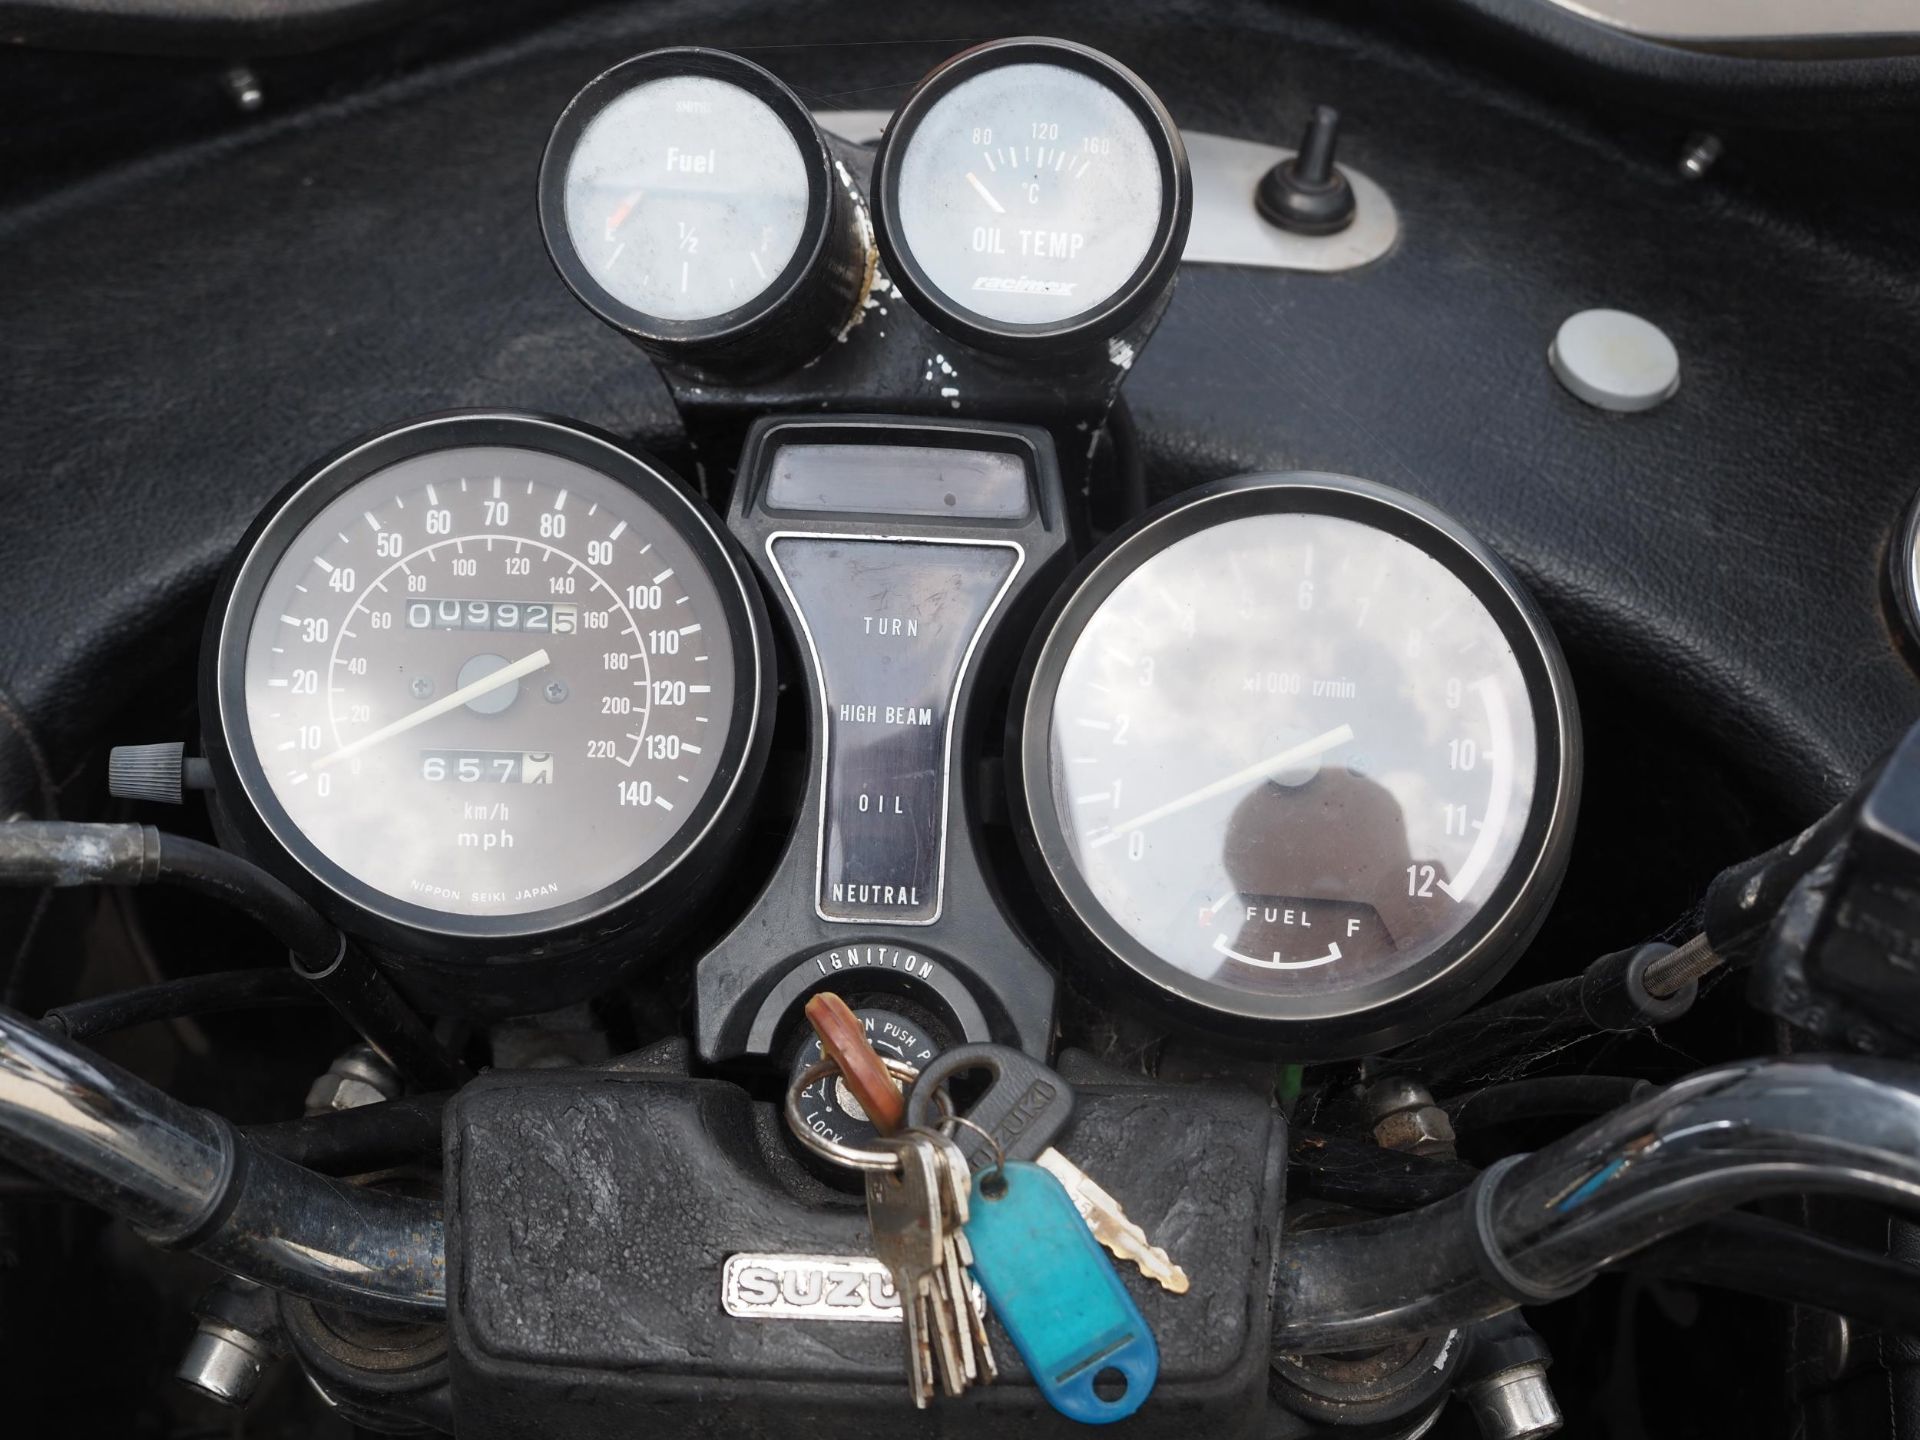 Suzuki GS850G sidecar outfit. 1987. 843cc Engine turns over and runs but may need new solenoid. Last - Image 8 of 8